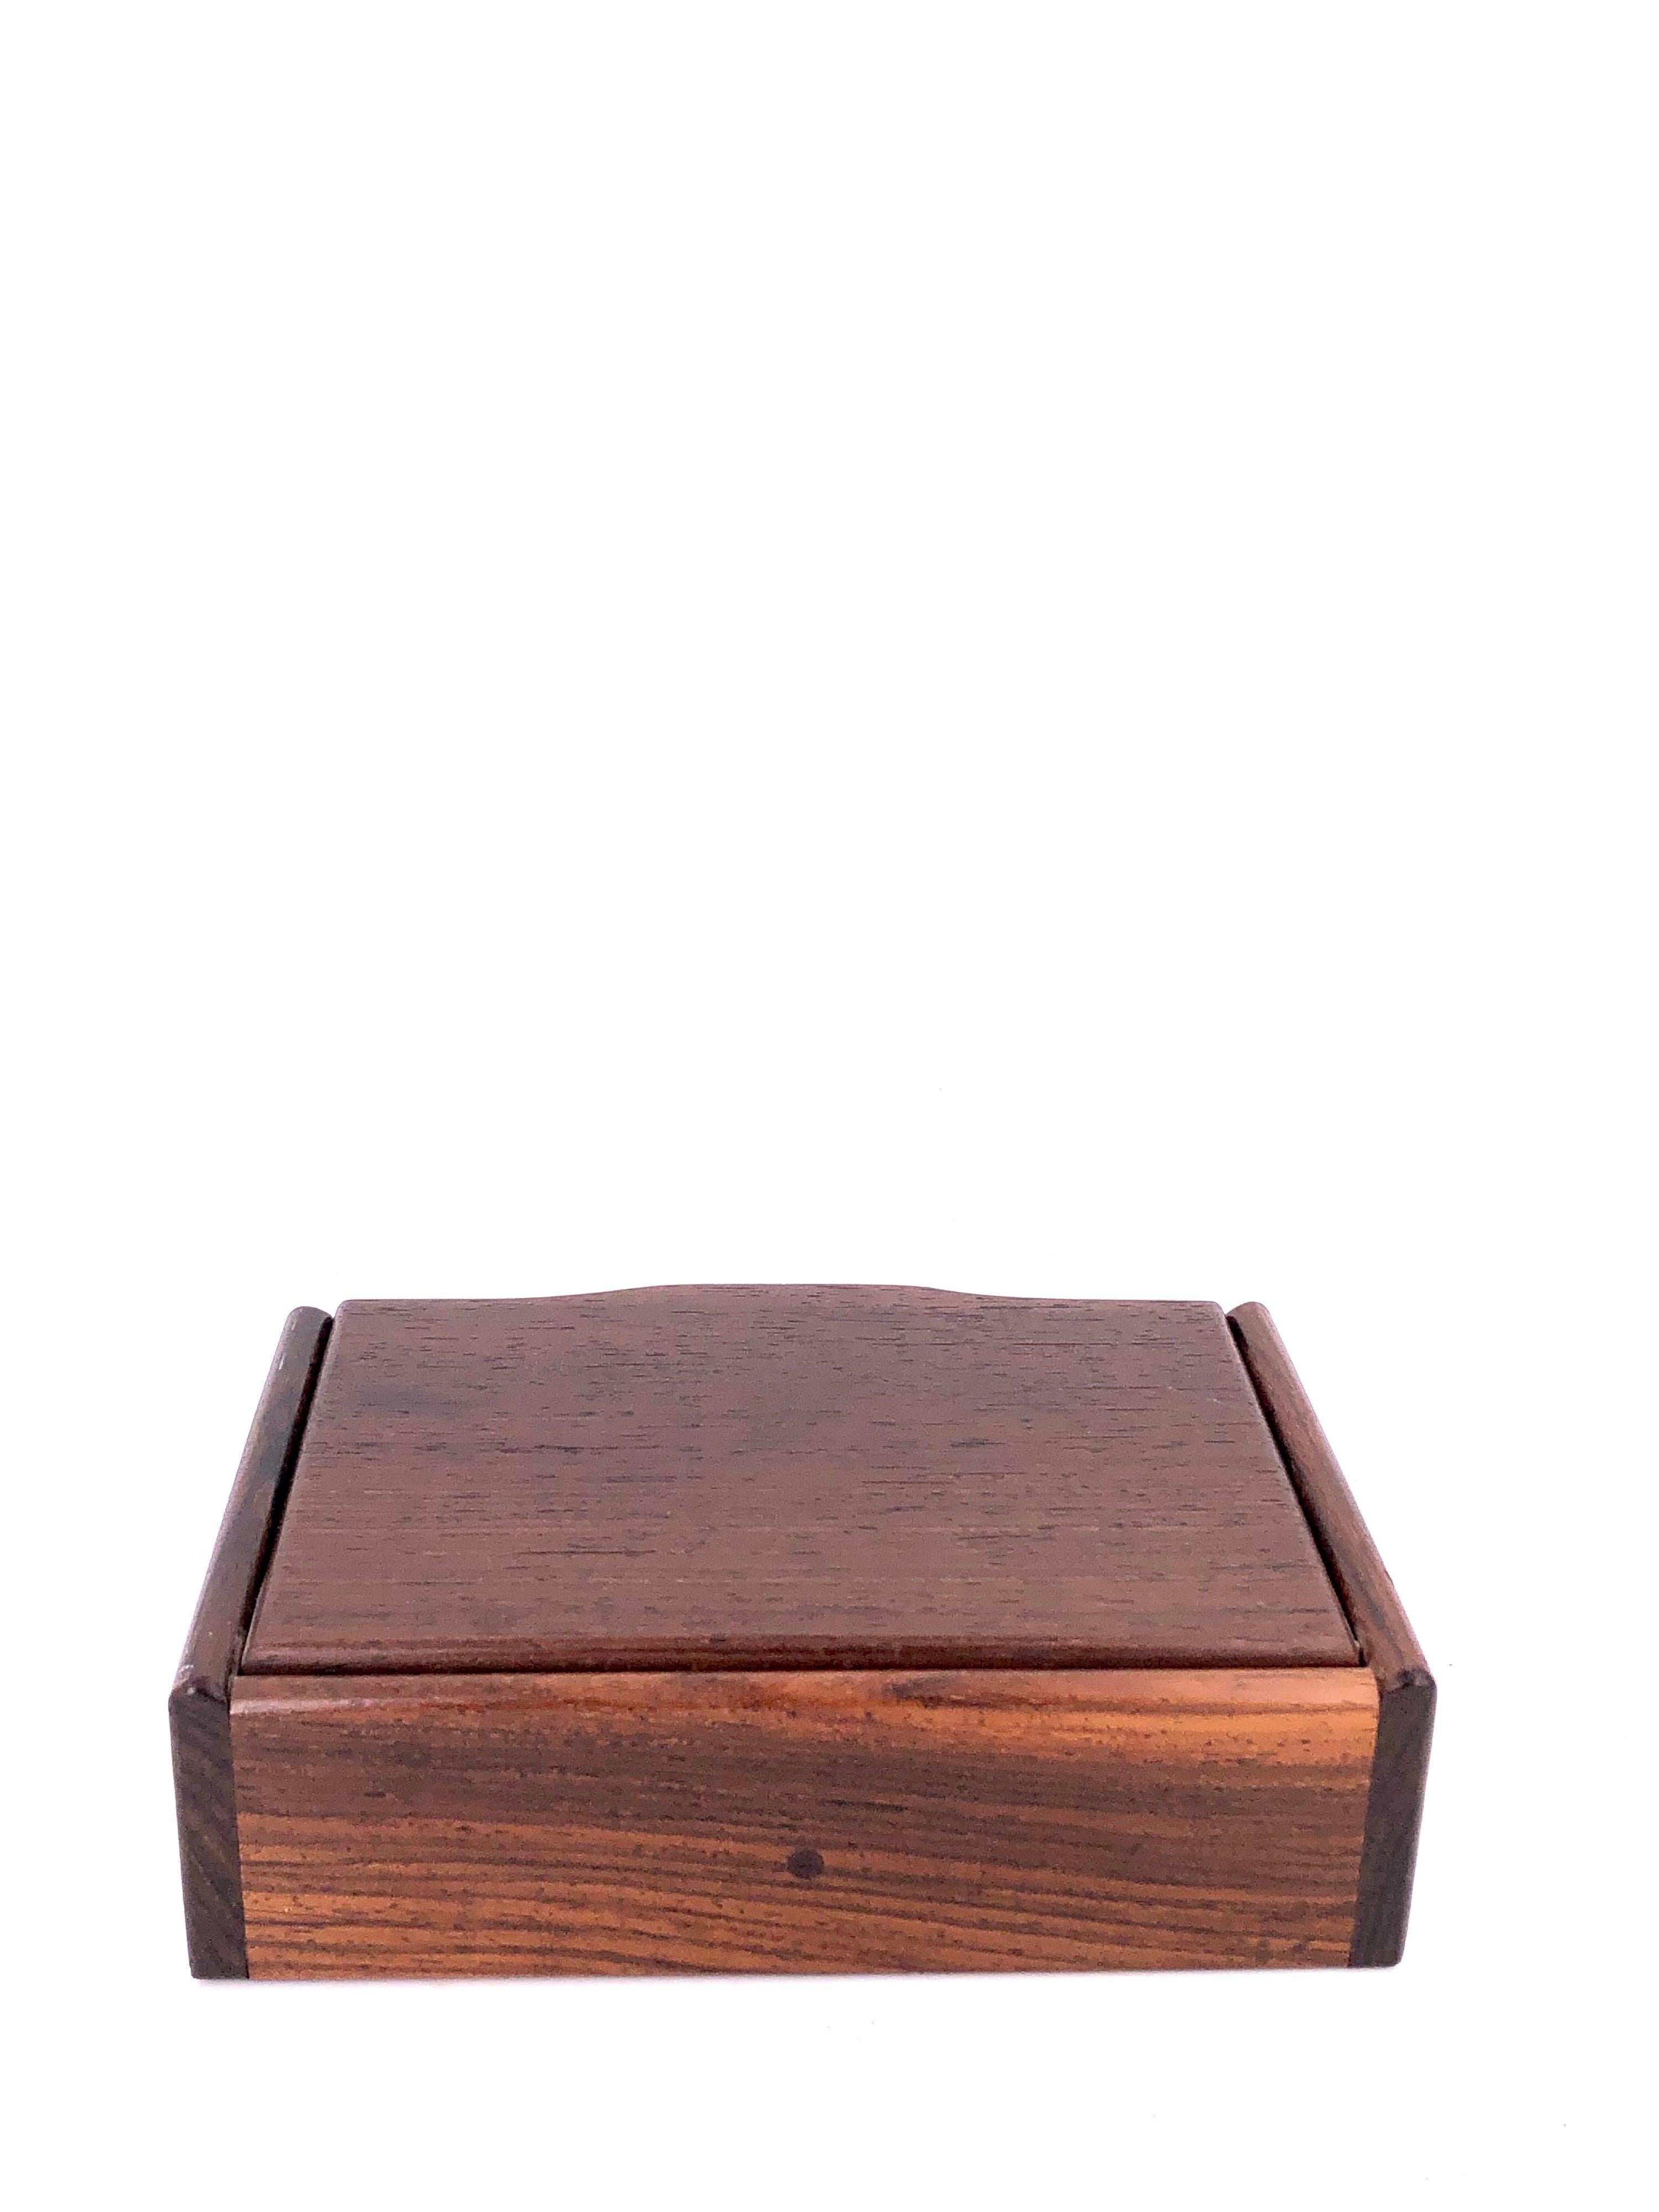 20th Century American Handcrafted Rosewood Solid Wood Jewelry Box